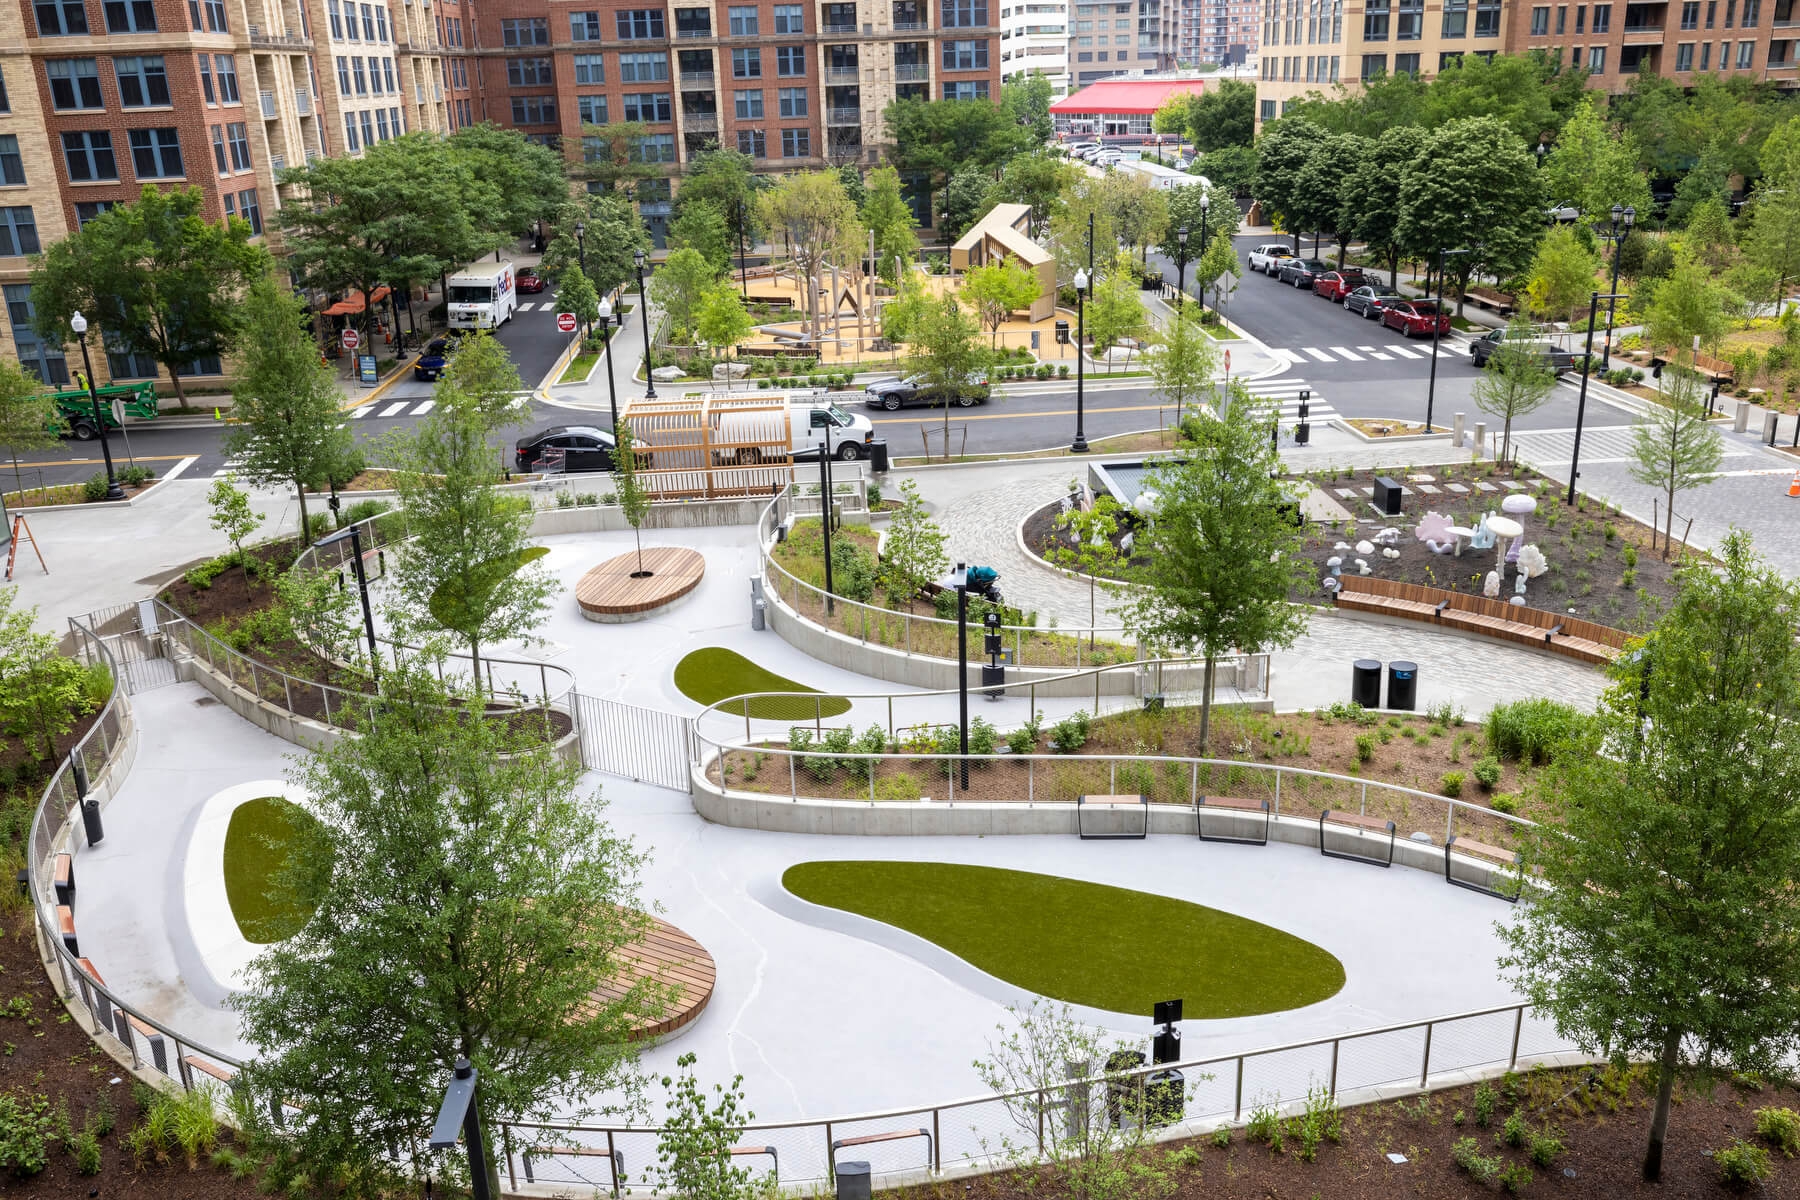 An image of the outside park area at Amazon HQ2